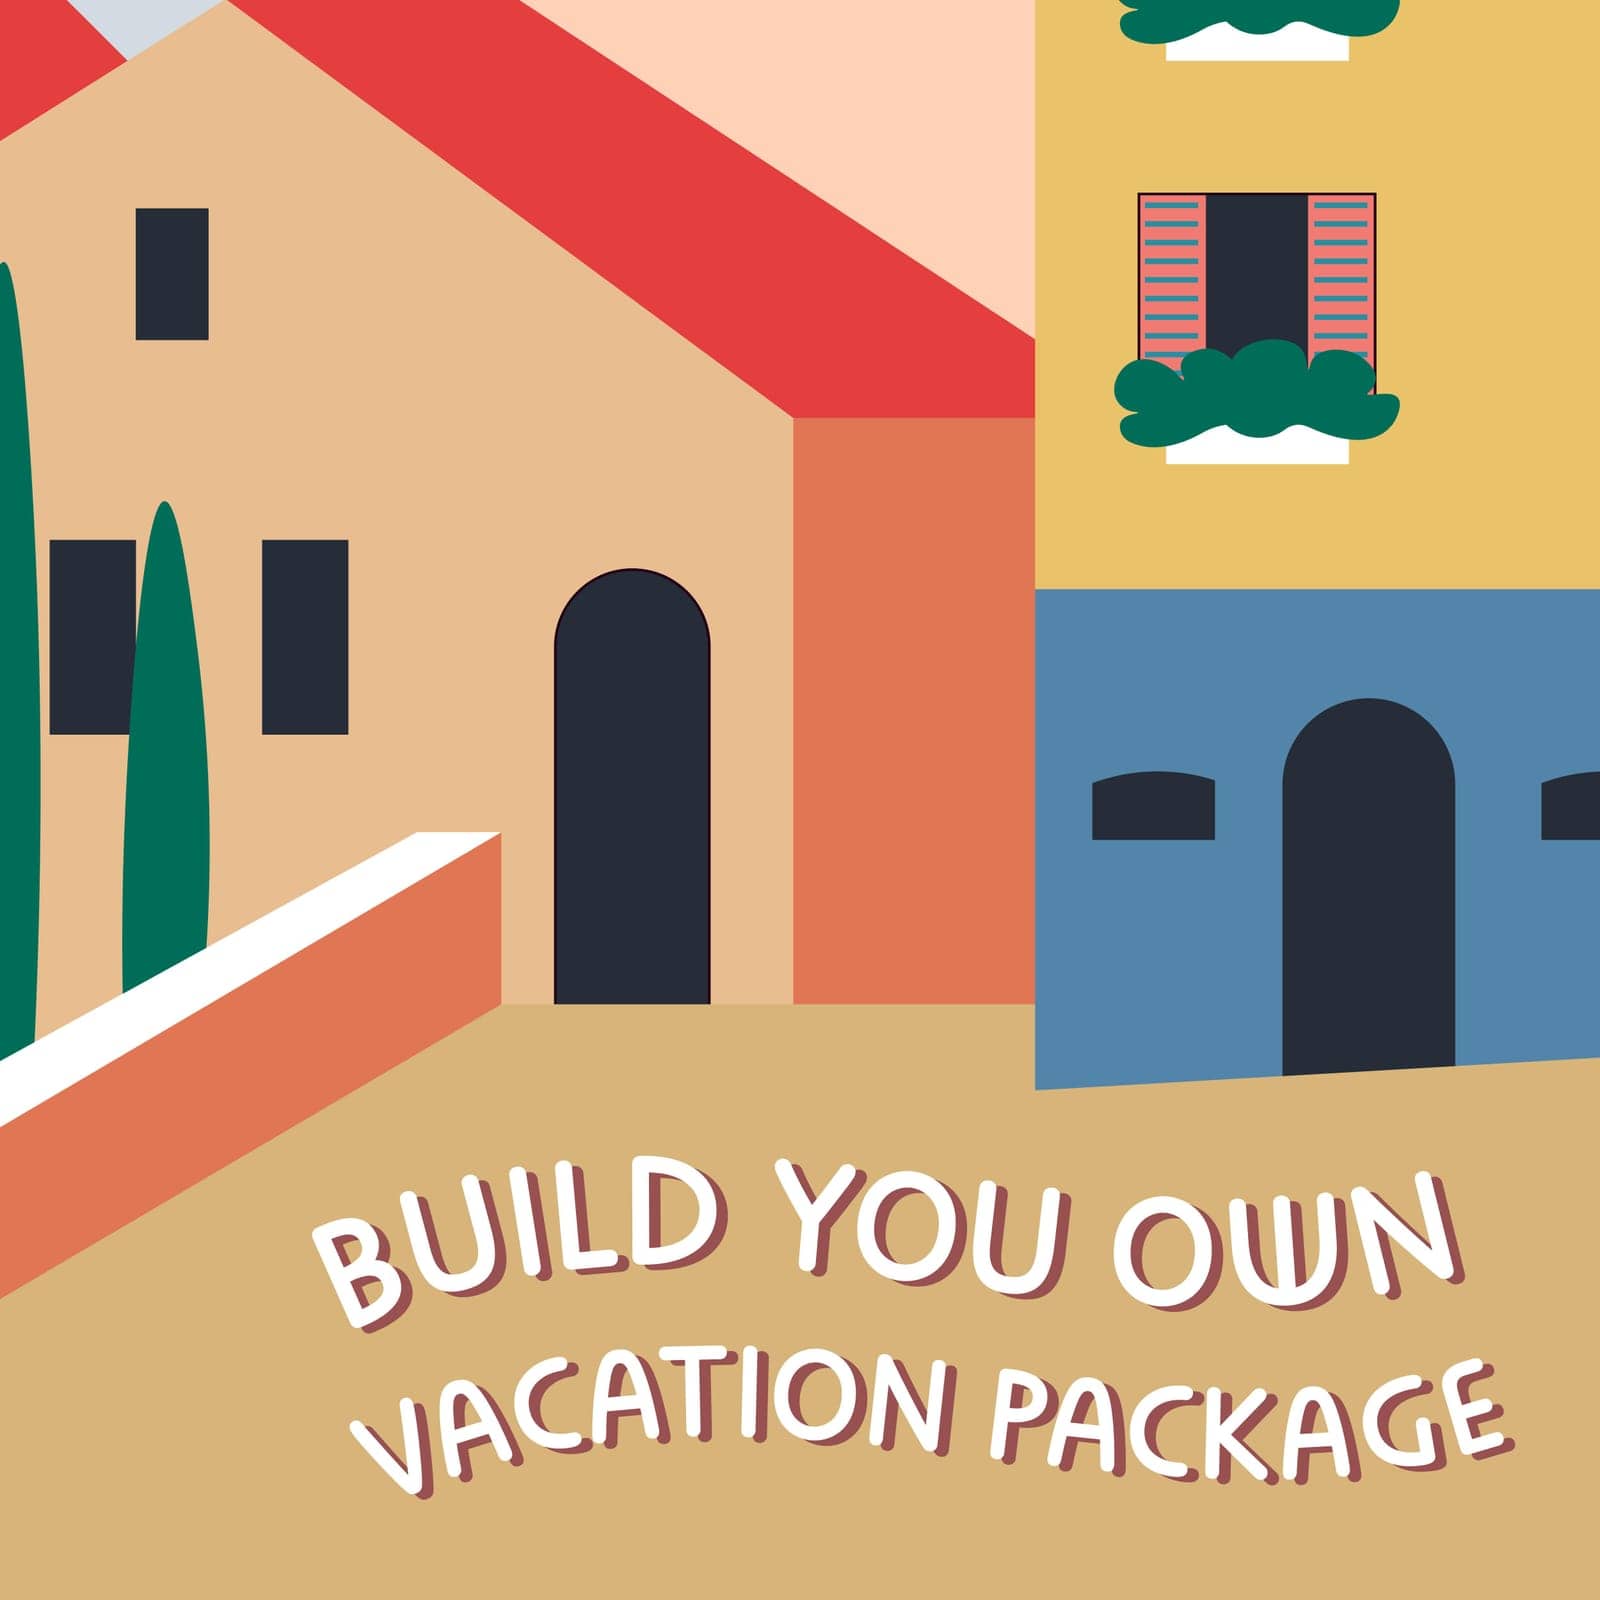 Build your own vacation package, traveling and fun by Sonulkaster